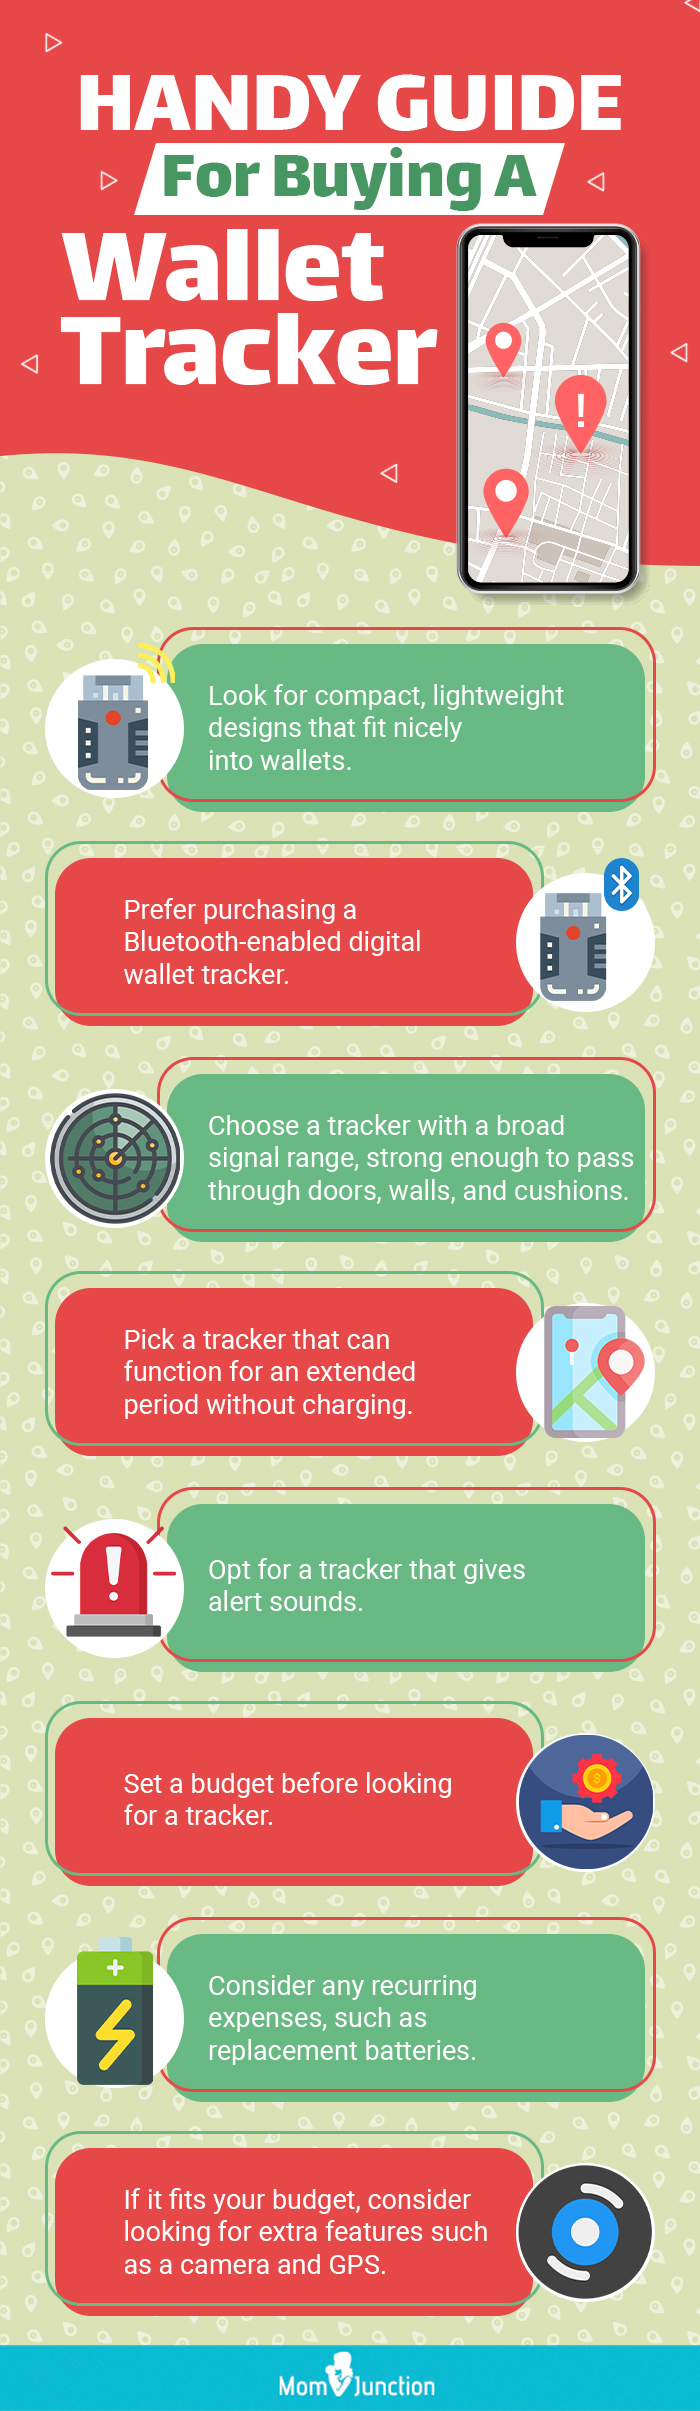 Handy Guide For Buying A Wallet Tracker (infographic)